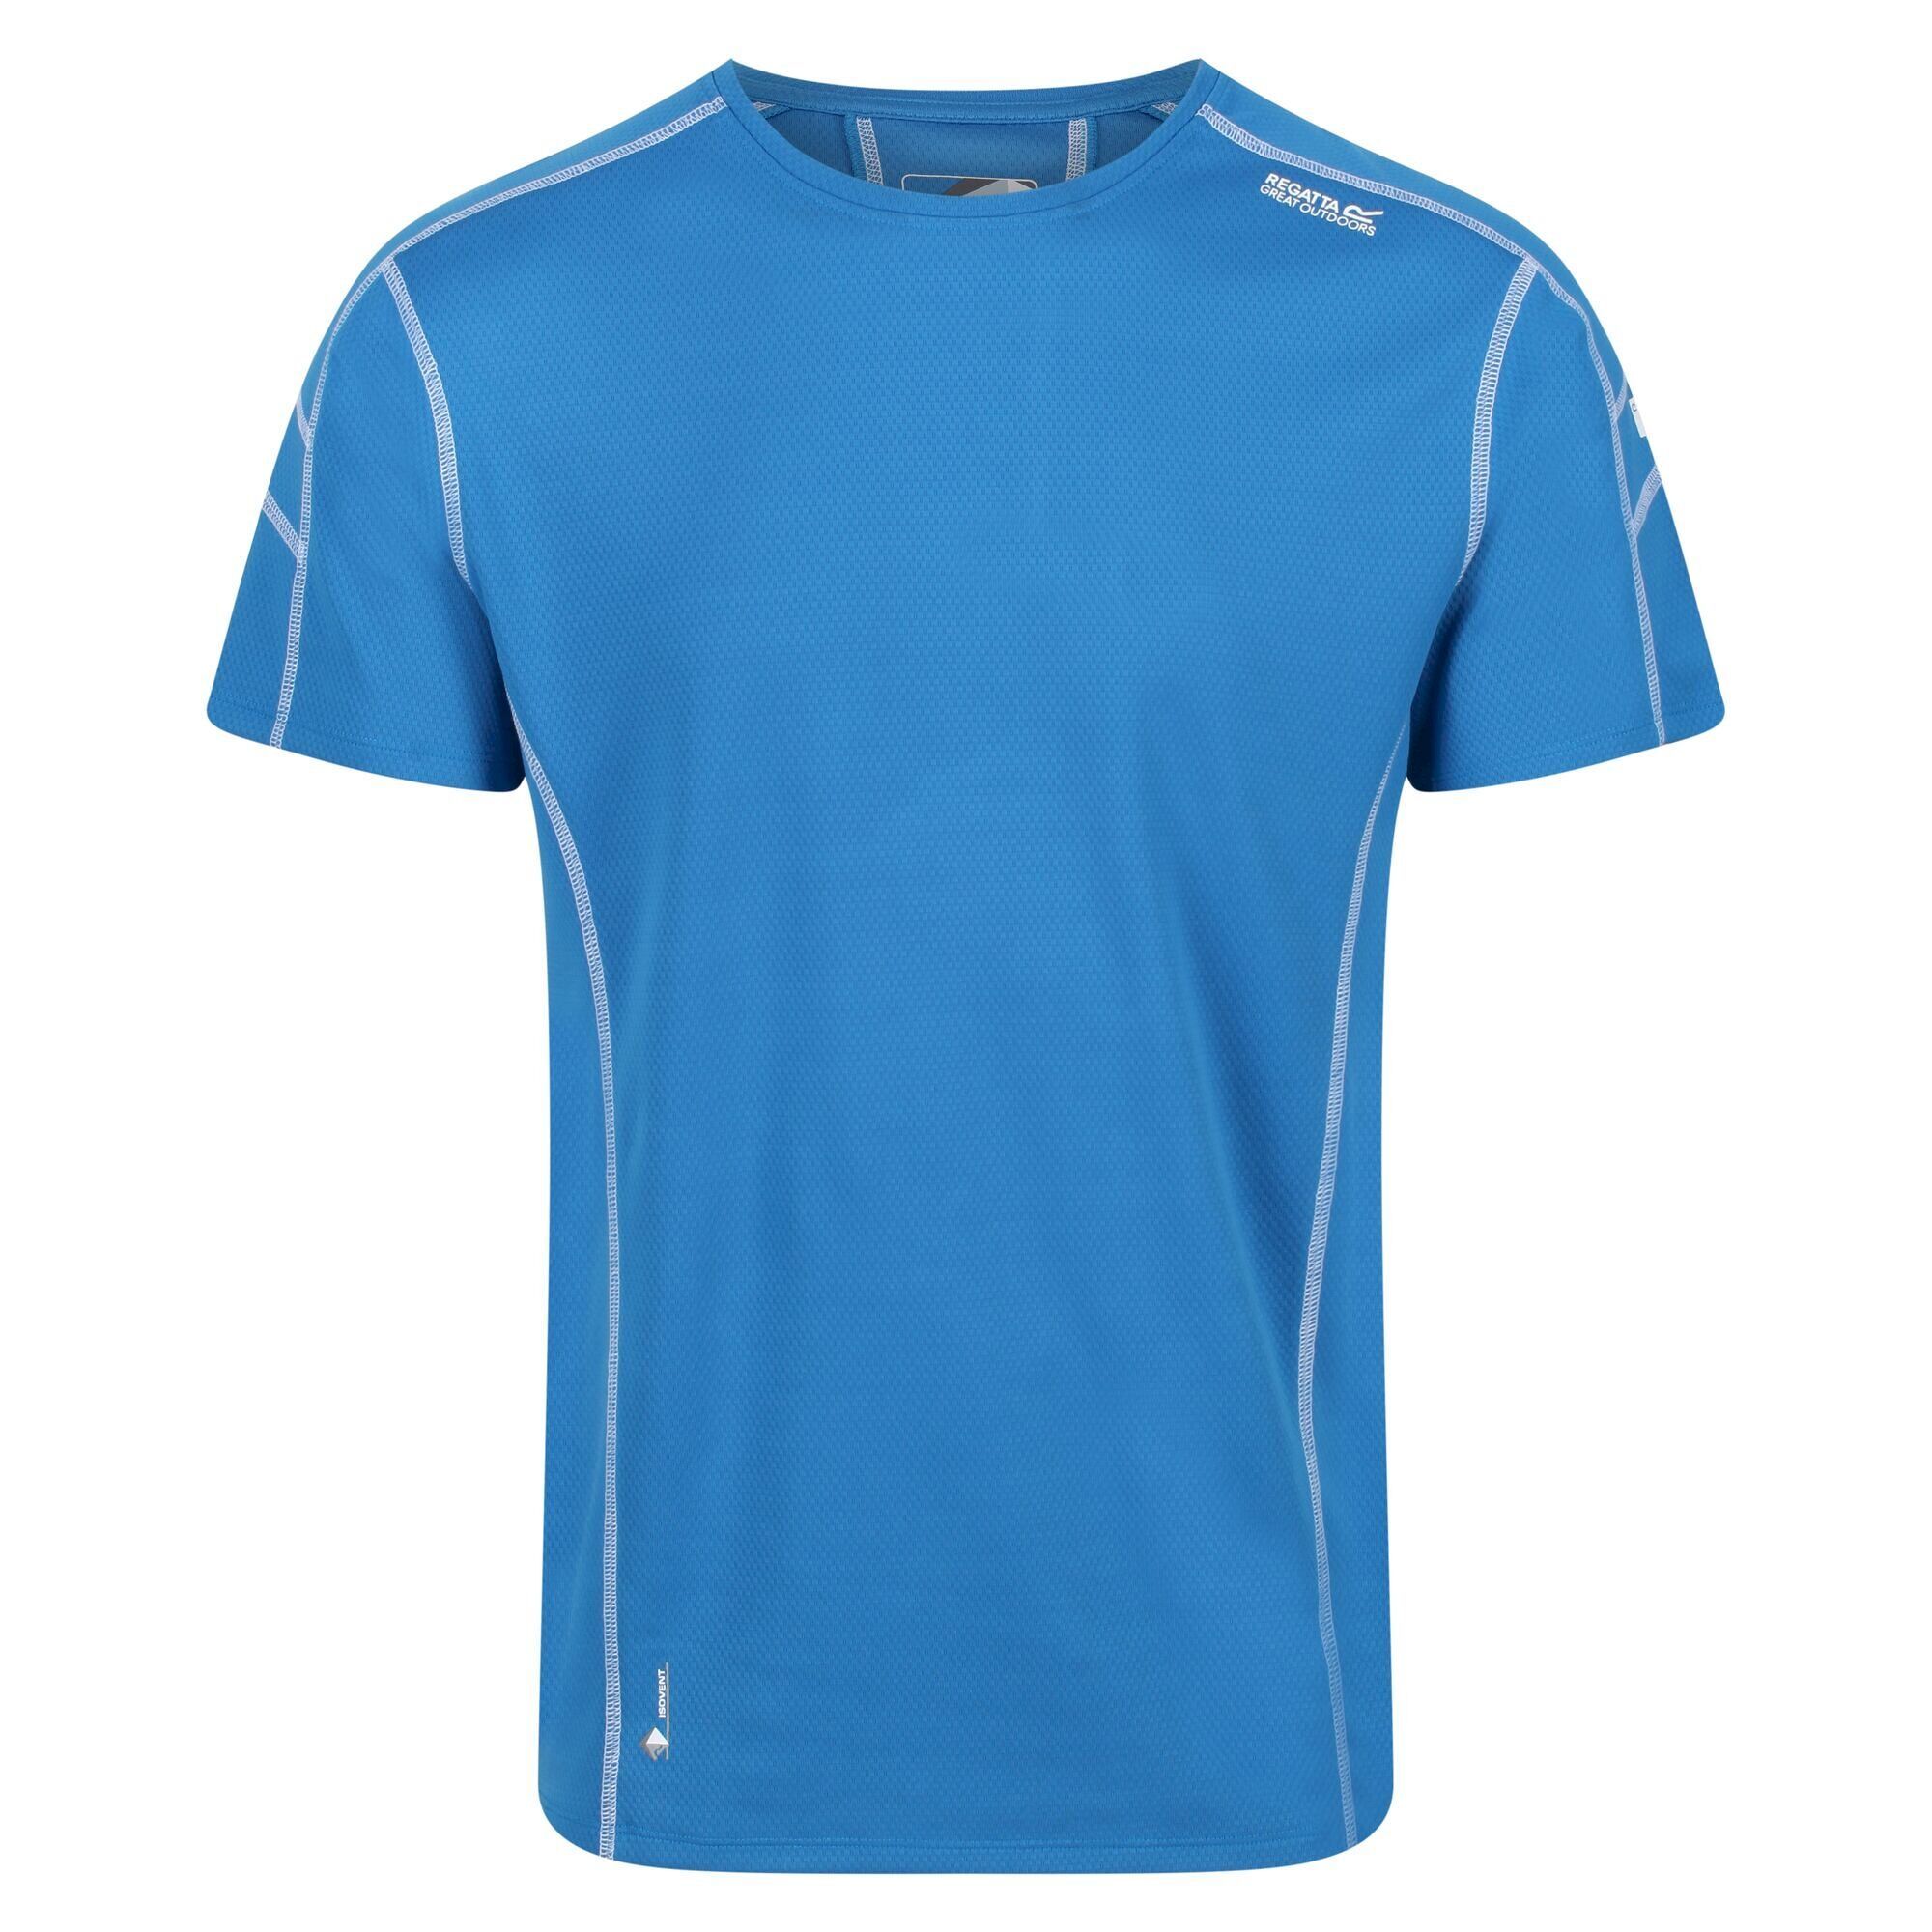 100% Polyester. Fabric: Isovent. Design: Logo. Neckline: Round Neck. Sleeve-Type: Short-Sleeved. Fabric Technology: Breathable, Moisture Wicking, Quick Dry. Hardwearing.